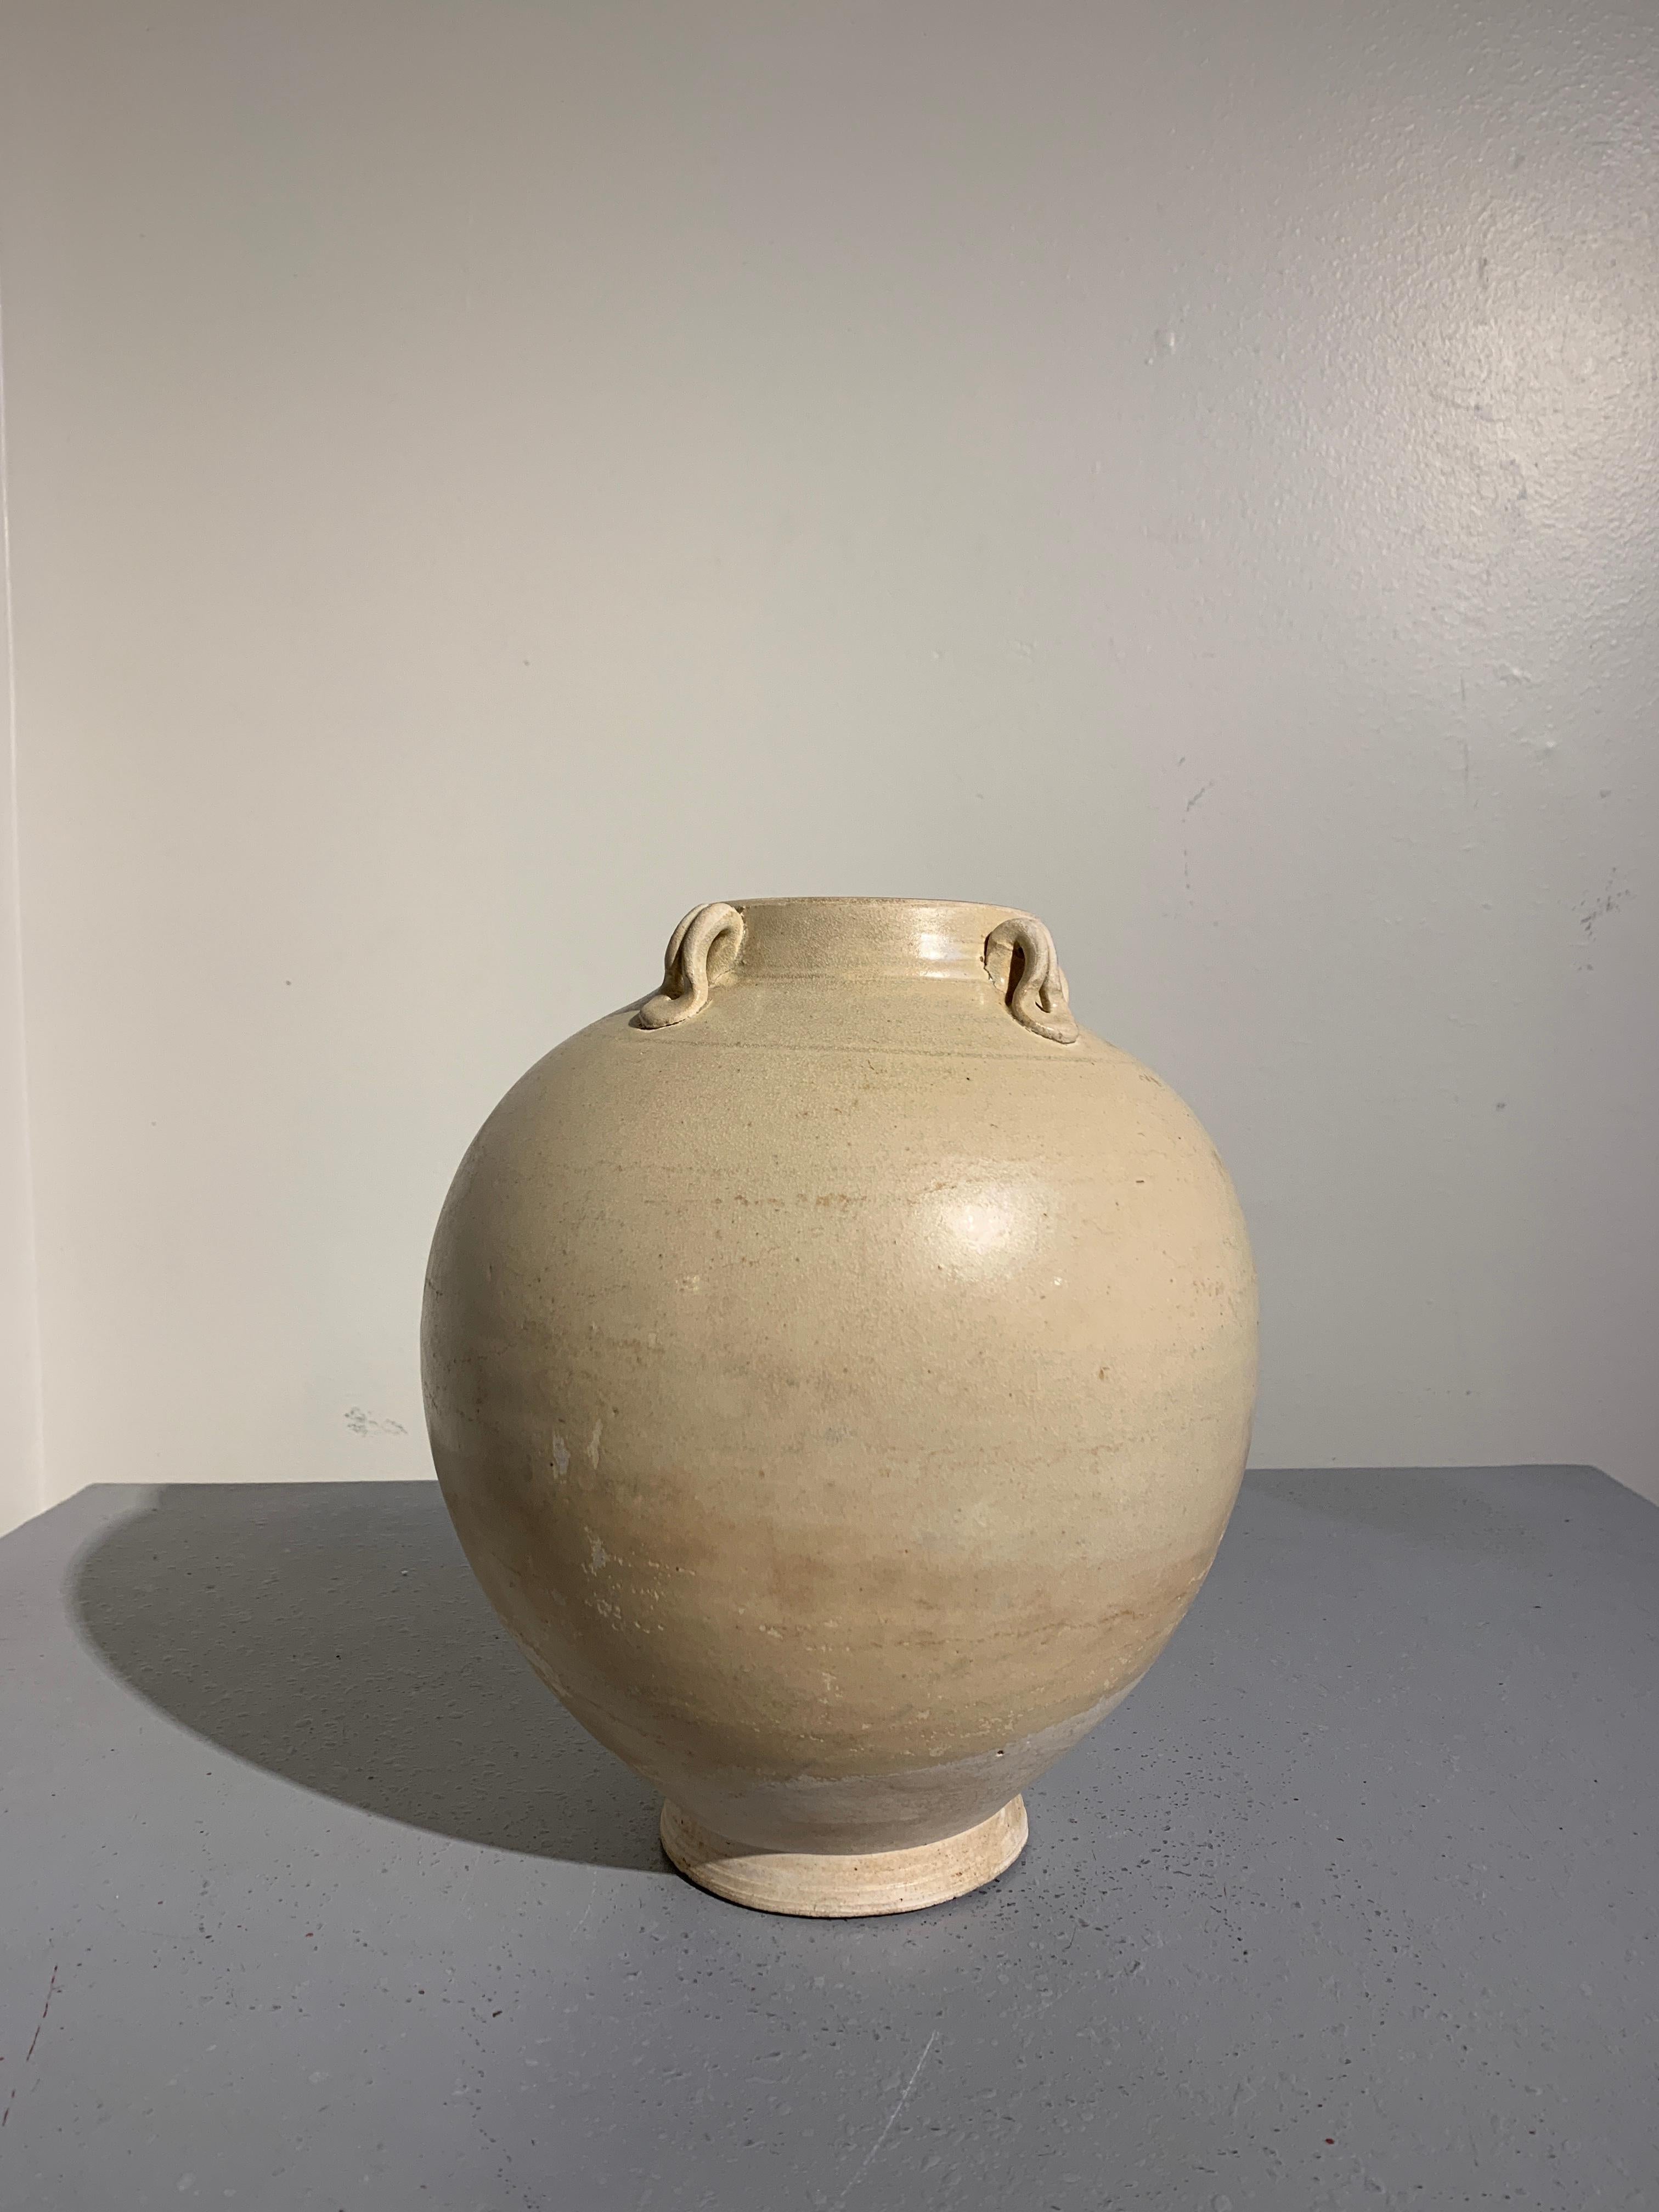 A simple and elegant Chinese high fired white glazed jar with four lug handles, Sui Dynasty (581 to 618), probably Heibei Province. 

The voluptuous jar crafted from a high fired stoneware and glazed a creamy white with a fine crackled surface.